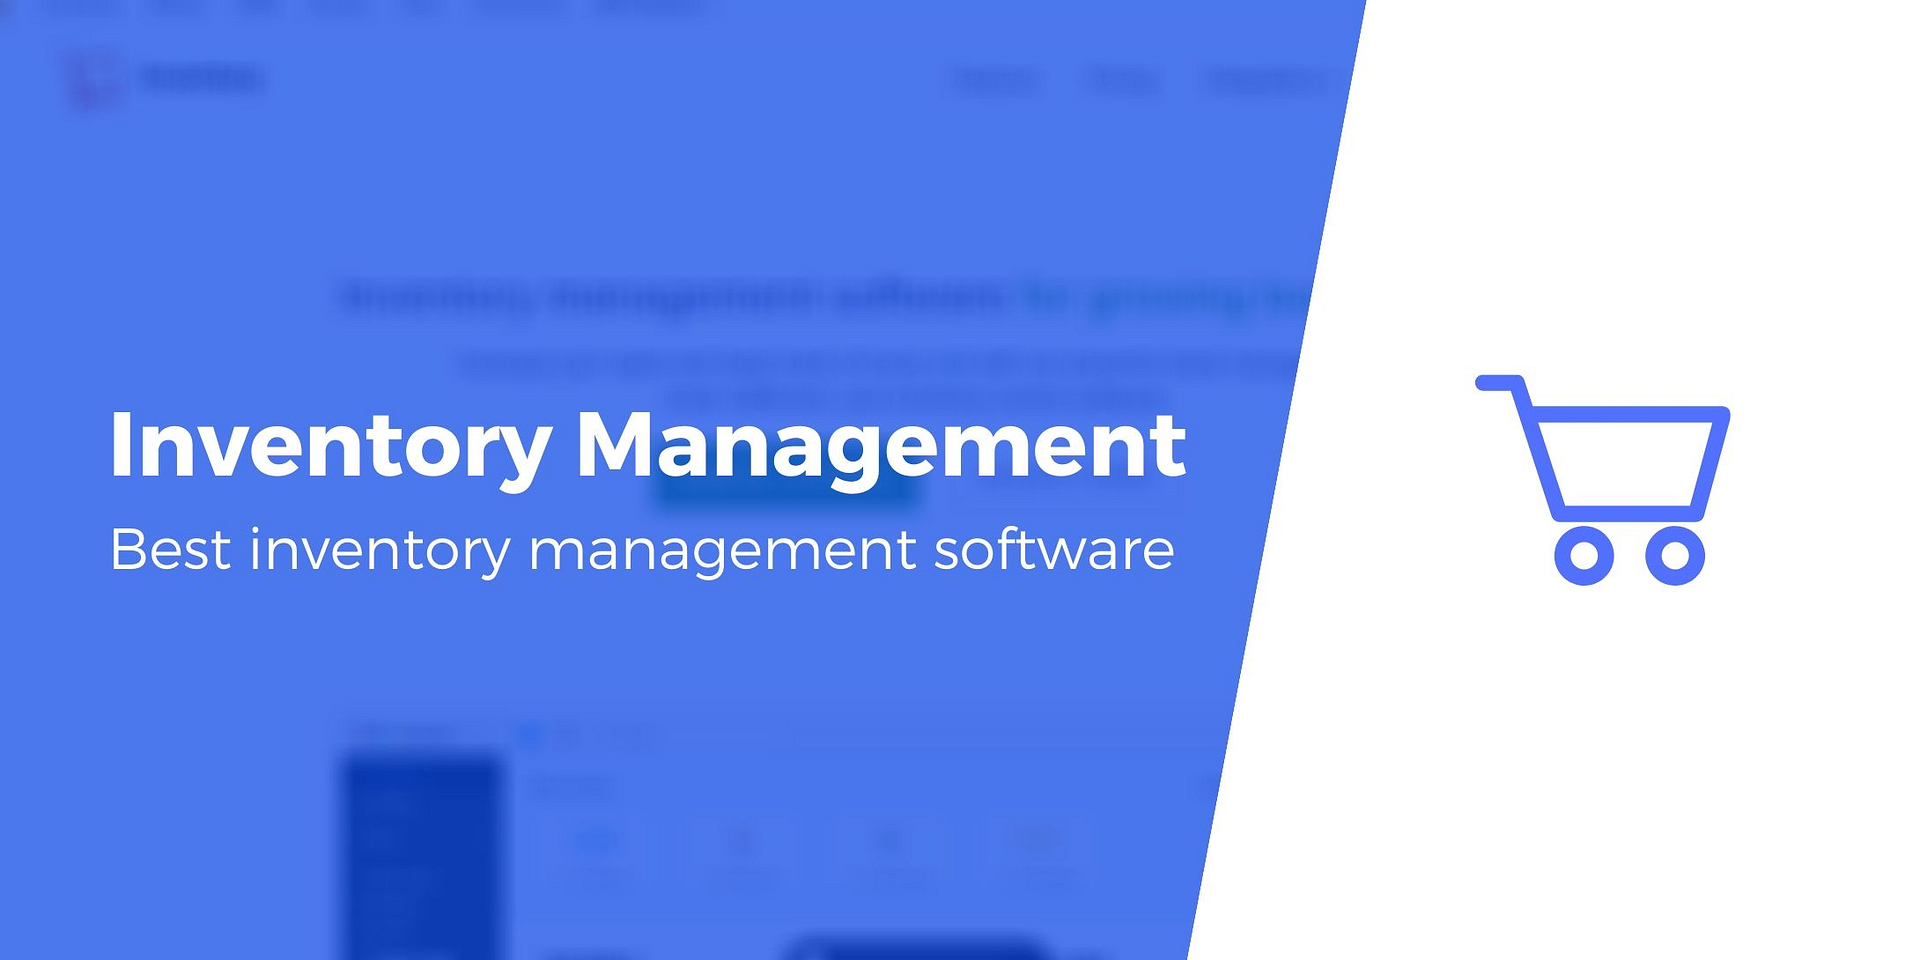 easy to use inventory management software with quickbooks